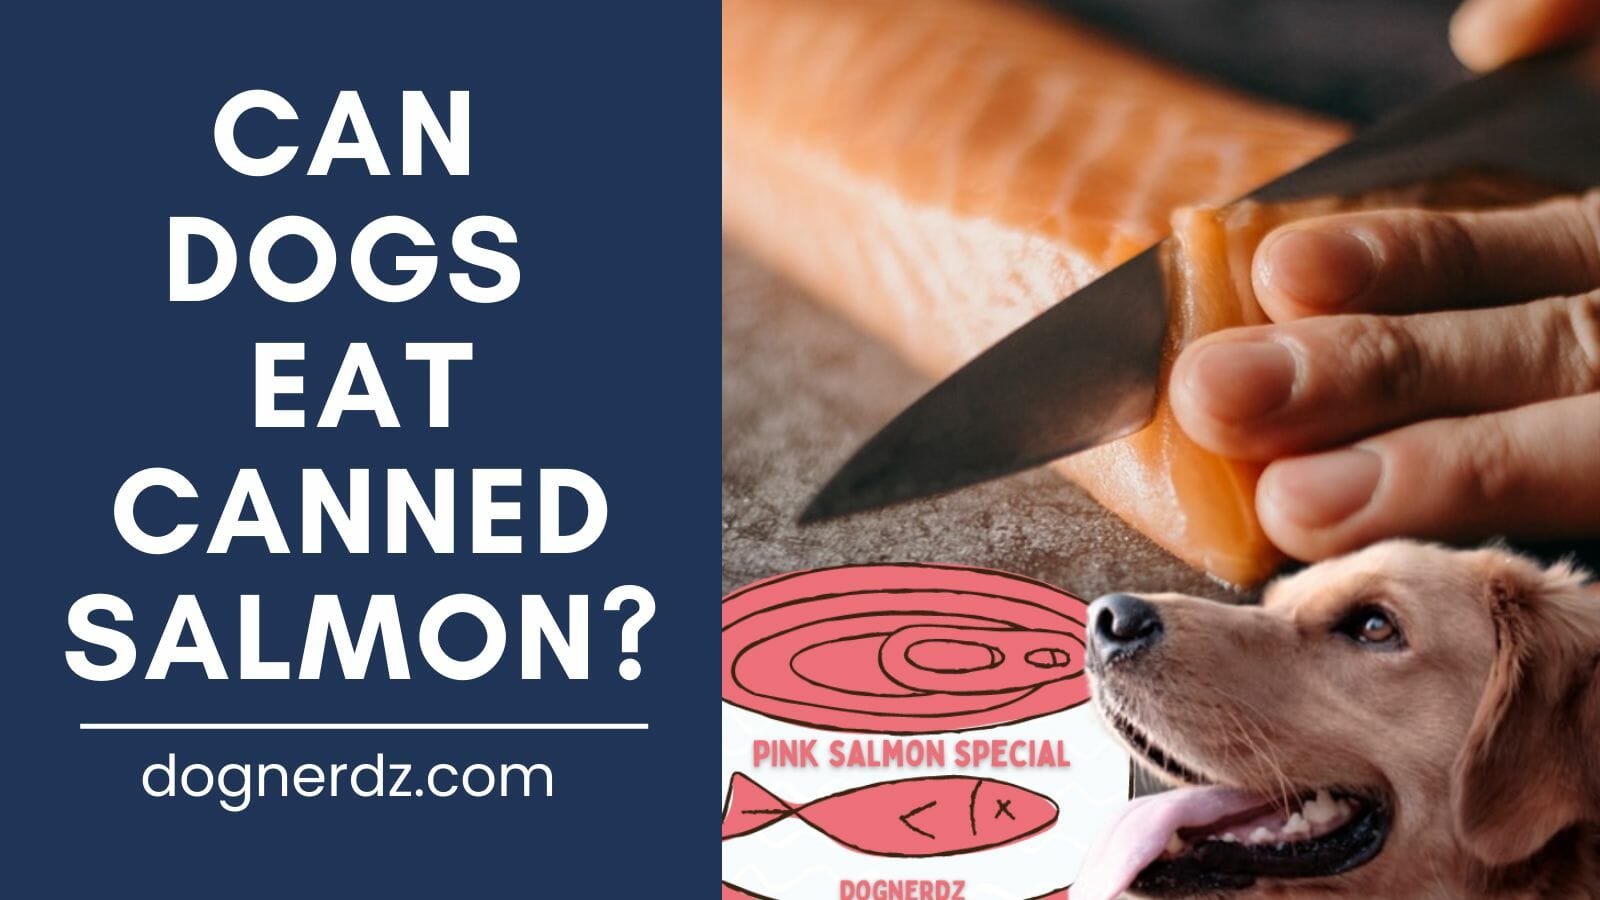 can dogs eat canned salmon?